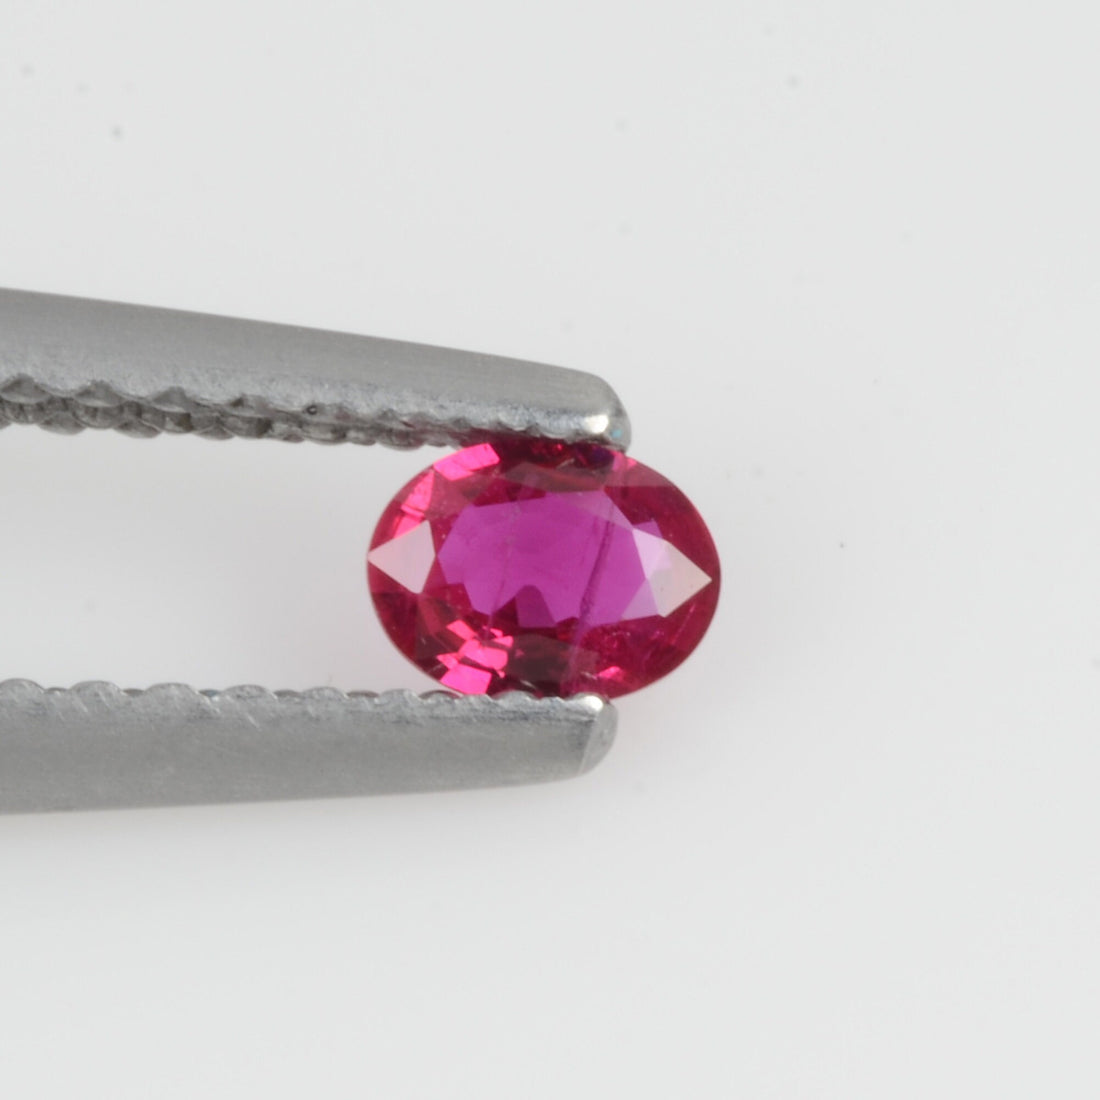 0.15 Cts Natural Ruby Loose Gemstone Oval Cut